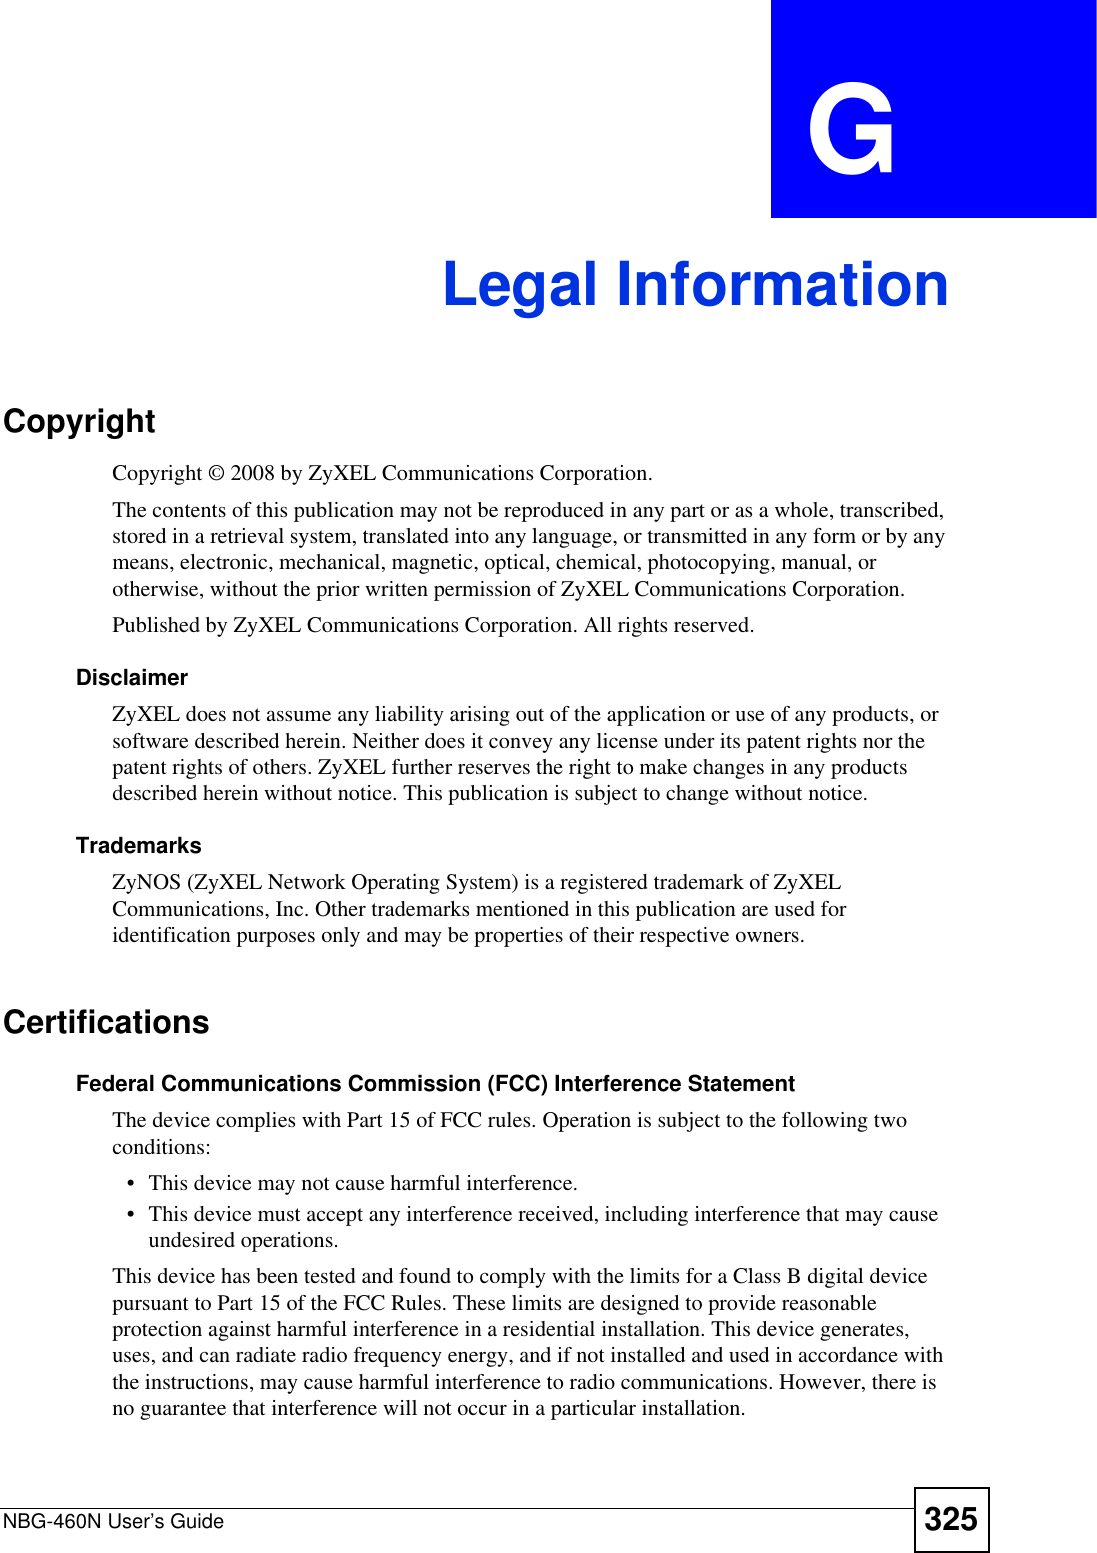 NBG-460N User’s Guide 325APPENDIX  G Legal InformationCopyrightCopyright © 2008 by ZyXEL Communications Corporation.The contents of this publication may not be reproduced in any part or as a whole, transcribed, stored in a retrieval system, translated into any language, or transmitted in any form or by any means, electronic, mechanical, magnetic, optical, chemical, photocopying, manual, or otherwise, without the prior written permission of ZyXEL Communications Corporation.Published by ZyXEL Communications Corporation. All rights reserved.DisclaimerZyXEL does not assume any liability arising out of the application or use of any products, or software described herein. Neither does it convey any license under its patent rights nor the patent rights of others. ZyXEL further reserves the right to make changes in any products described herein without notice. This publication is subject to change without notice.TrademarksZyNOS (ZyXEL Network Operating System) is a registered trademark of ZyXEL Communications, Inc. Other trademarks mentioned in this publication are used for identification purposes only and may be properties of their respective owners.CertificationsFederal Communications Commission (FCC) Interference StatementThe device complies with Part 15 of FCC rules. Operation is subject to the following two conditions:• This device may not cause harmful interference.• This device must accept any interference received, including interference that may cause undesired operations.This device has been tested and found to comply with the limits for a Class B digital device pursuant to Part 15 of the FCC Rules. These limits are designed to provide reasonable protection against harmful interference in a residential installation. This device generates, uses, and can radiate radio frequency energy, and if not installed and used in accordance with the instructions, may cause harmful interference to radio communications. However, there is no guarantee that interference will not occur in a particular installation.